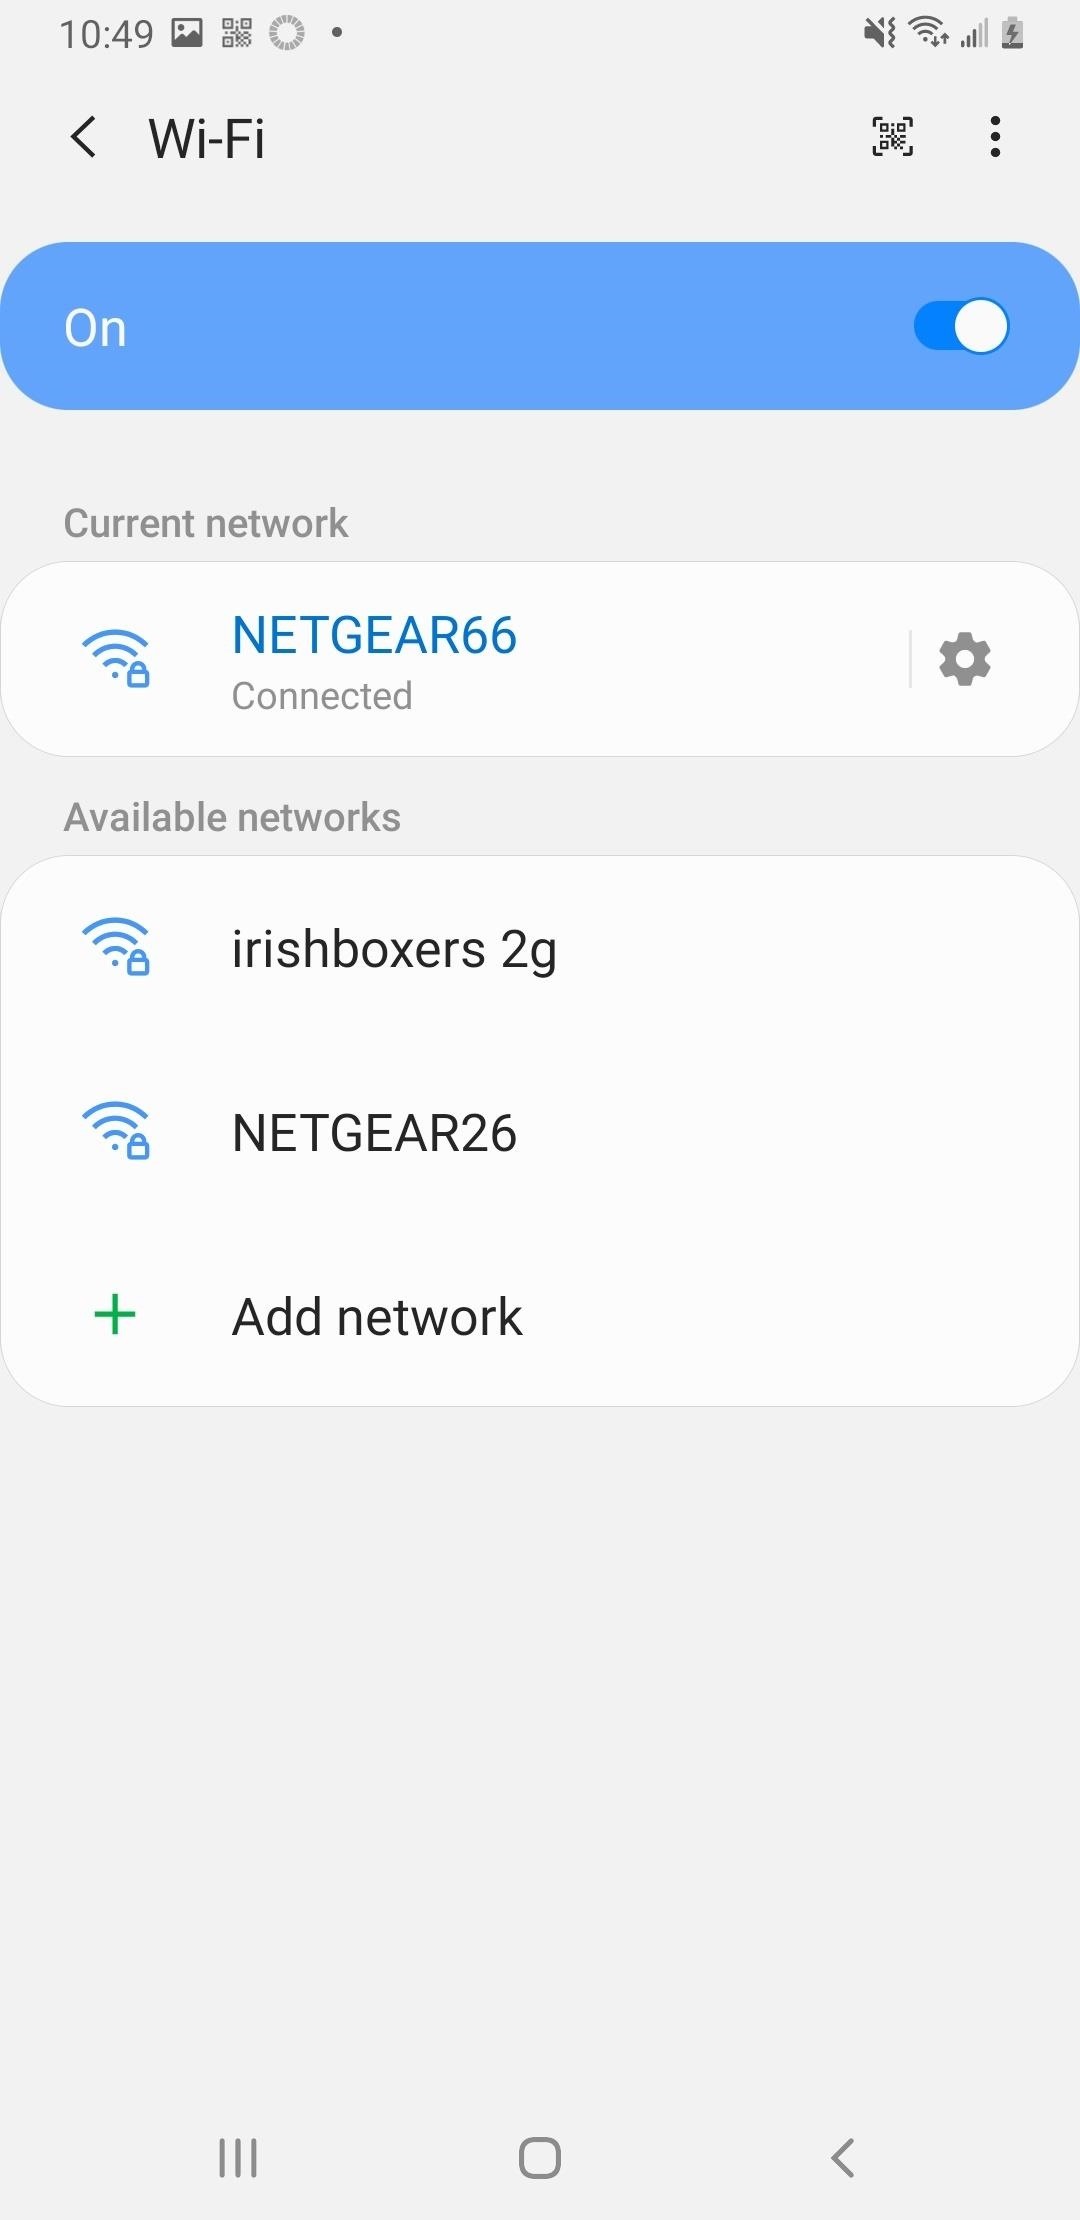 The Best Way for Any Guest to Connect to Your Wi-Fi Network Automatically